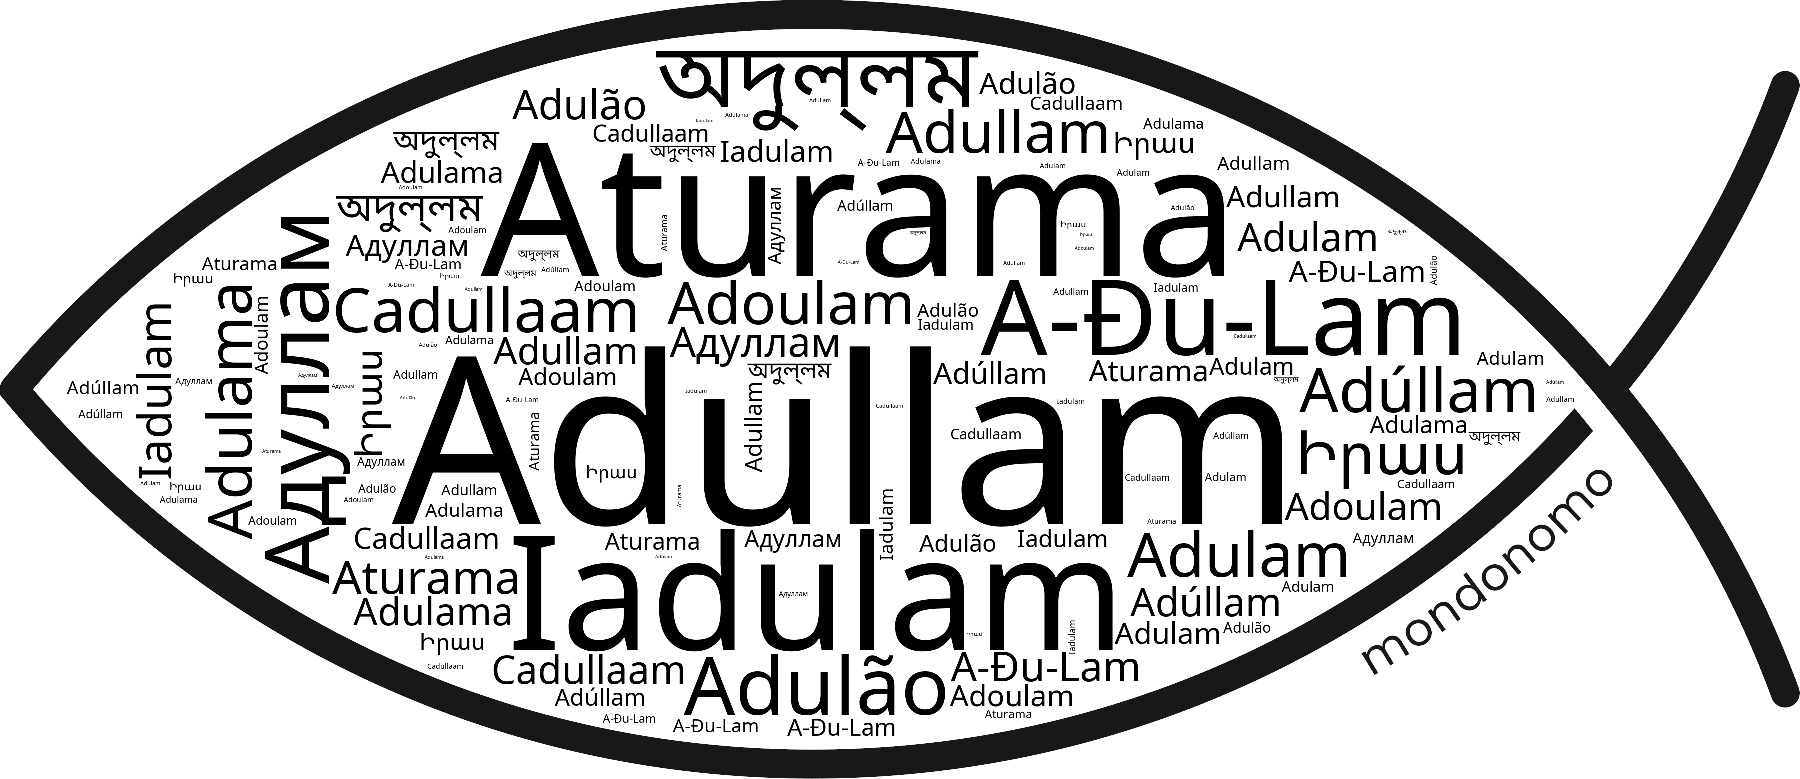 Name Adullam in the world's Bibles